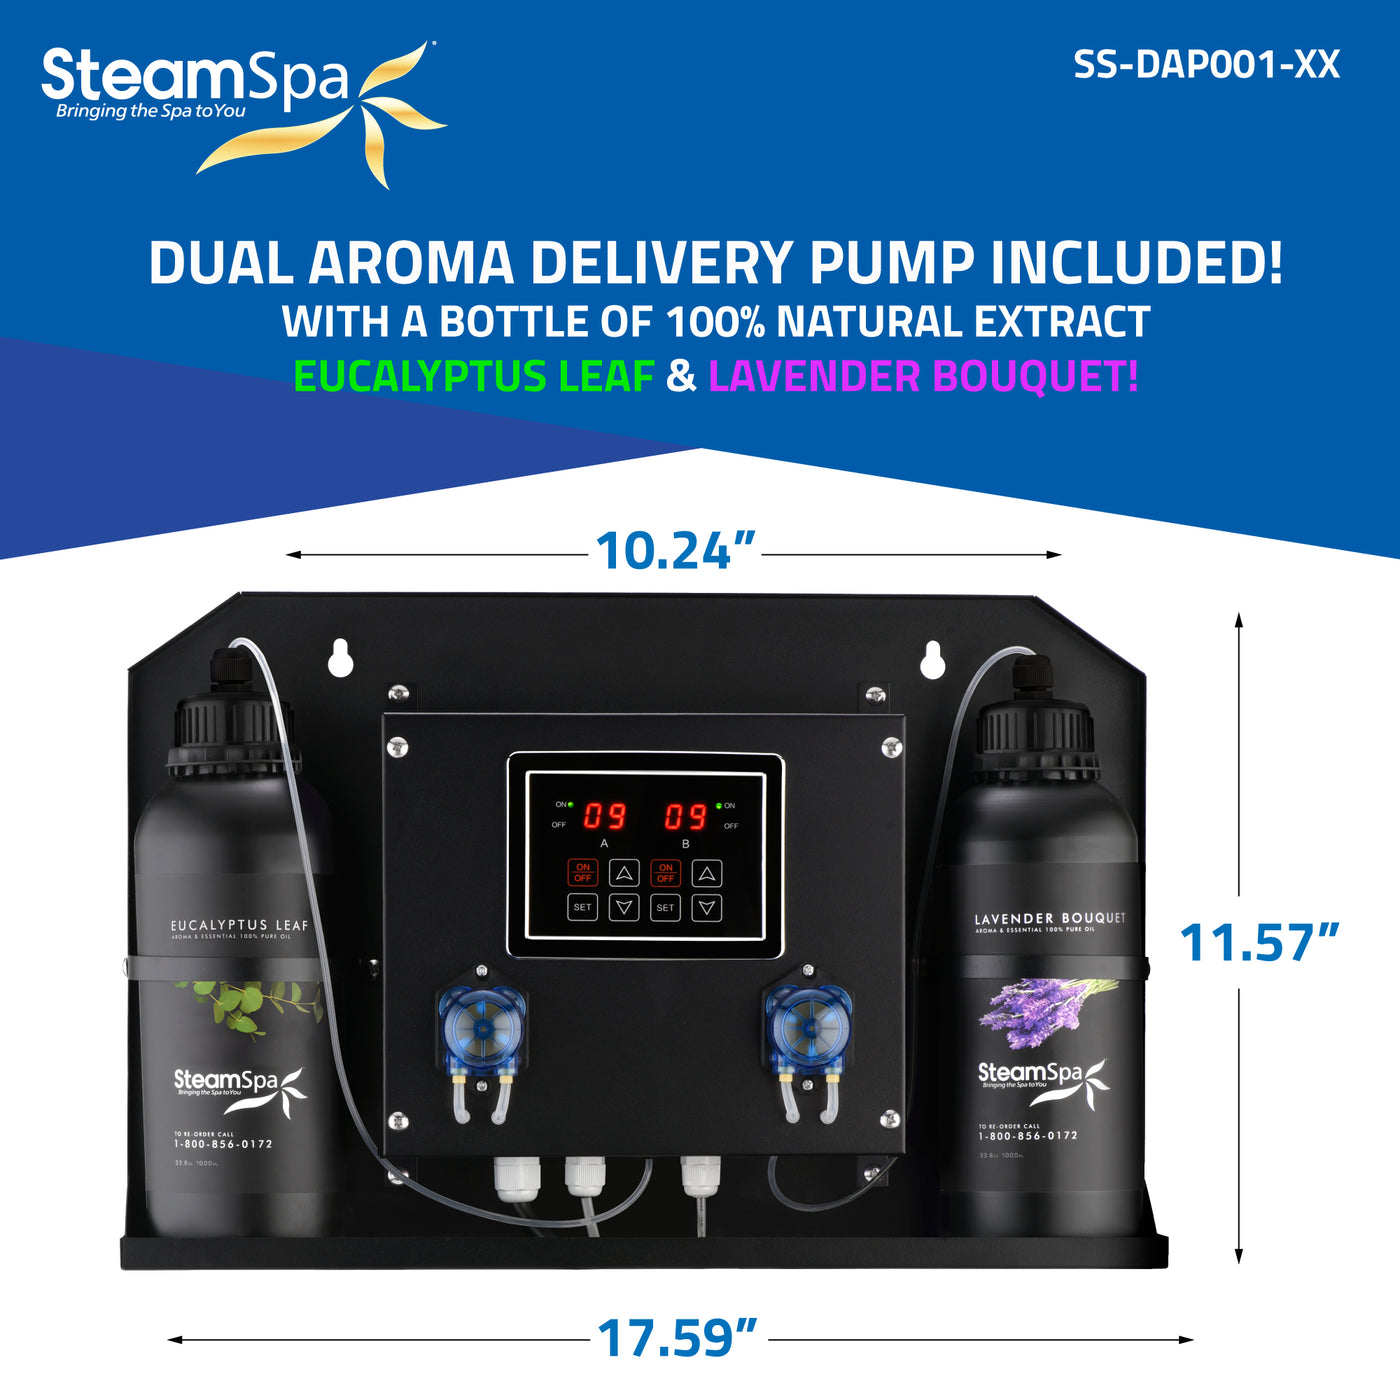 Black Series WiFi and Bluetooth 6kW QuickStart Steam Bath Generator Package with Dual Aroma Pump in Brushed Nickel BKT600BN-ADP